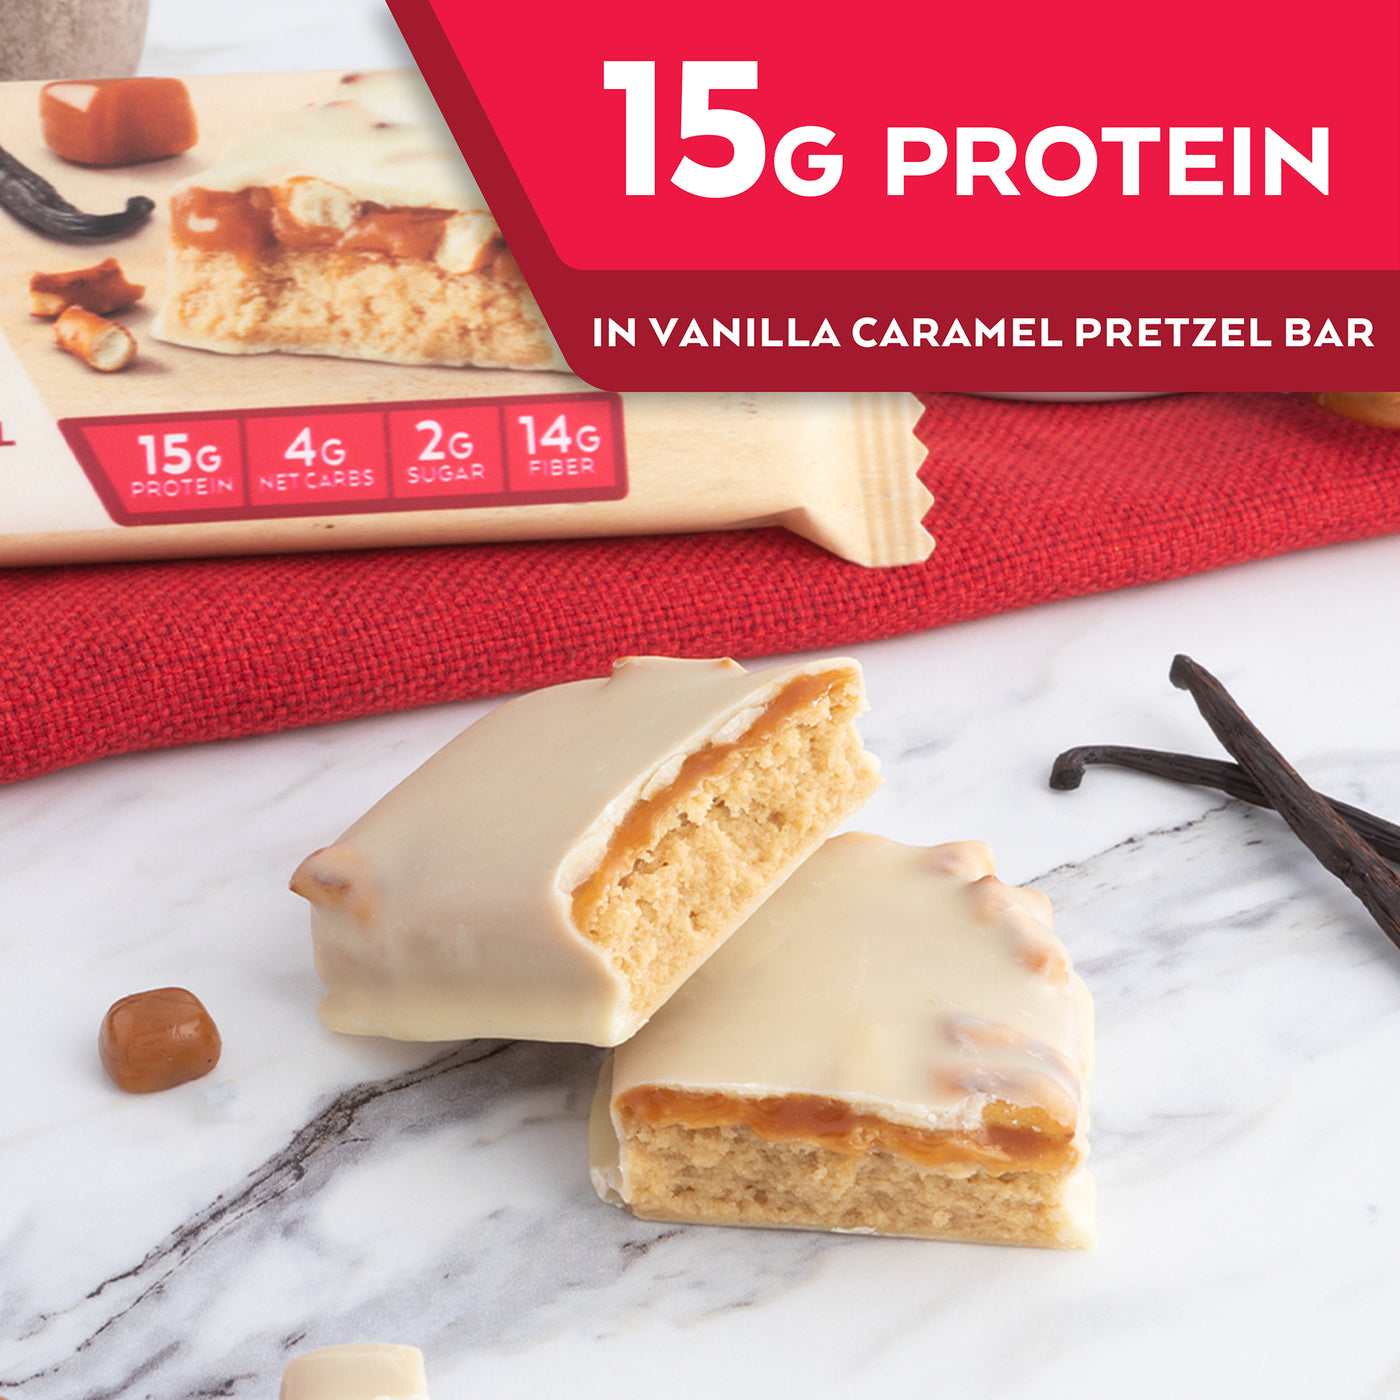 Vanilla Caramel Pretzel Bar with vanilla bean, caramel and red cloth on marble table; 15G Protein in vanilla caramel pretzel bar